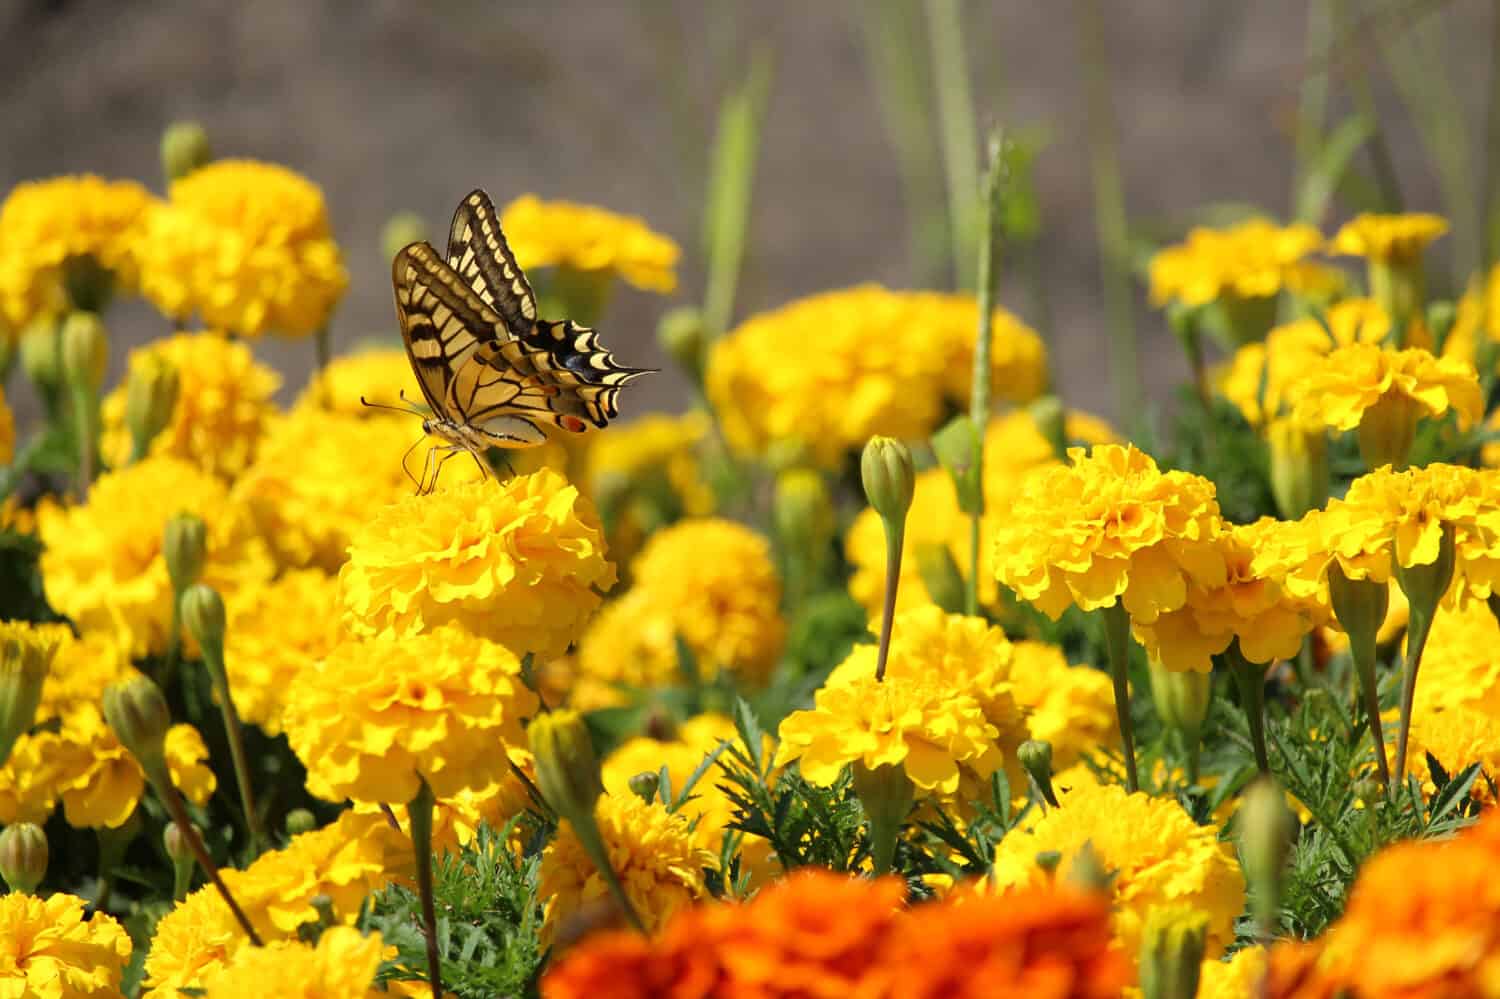 Yellow and black butterfly on yellow carnation flower in a garden.